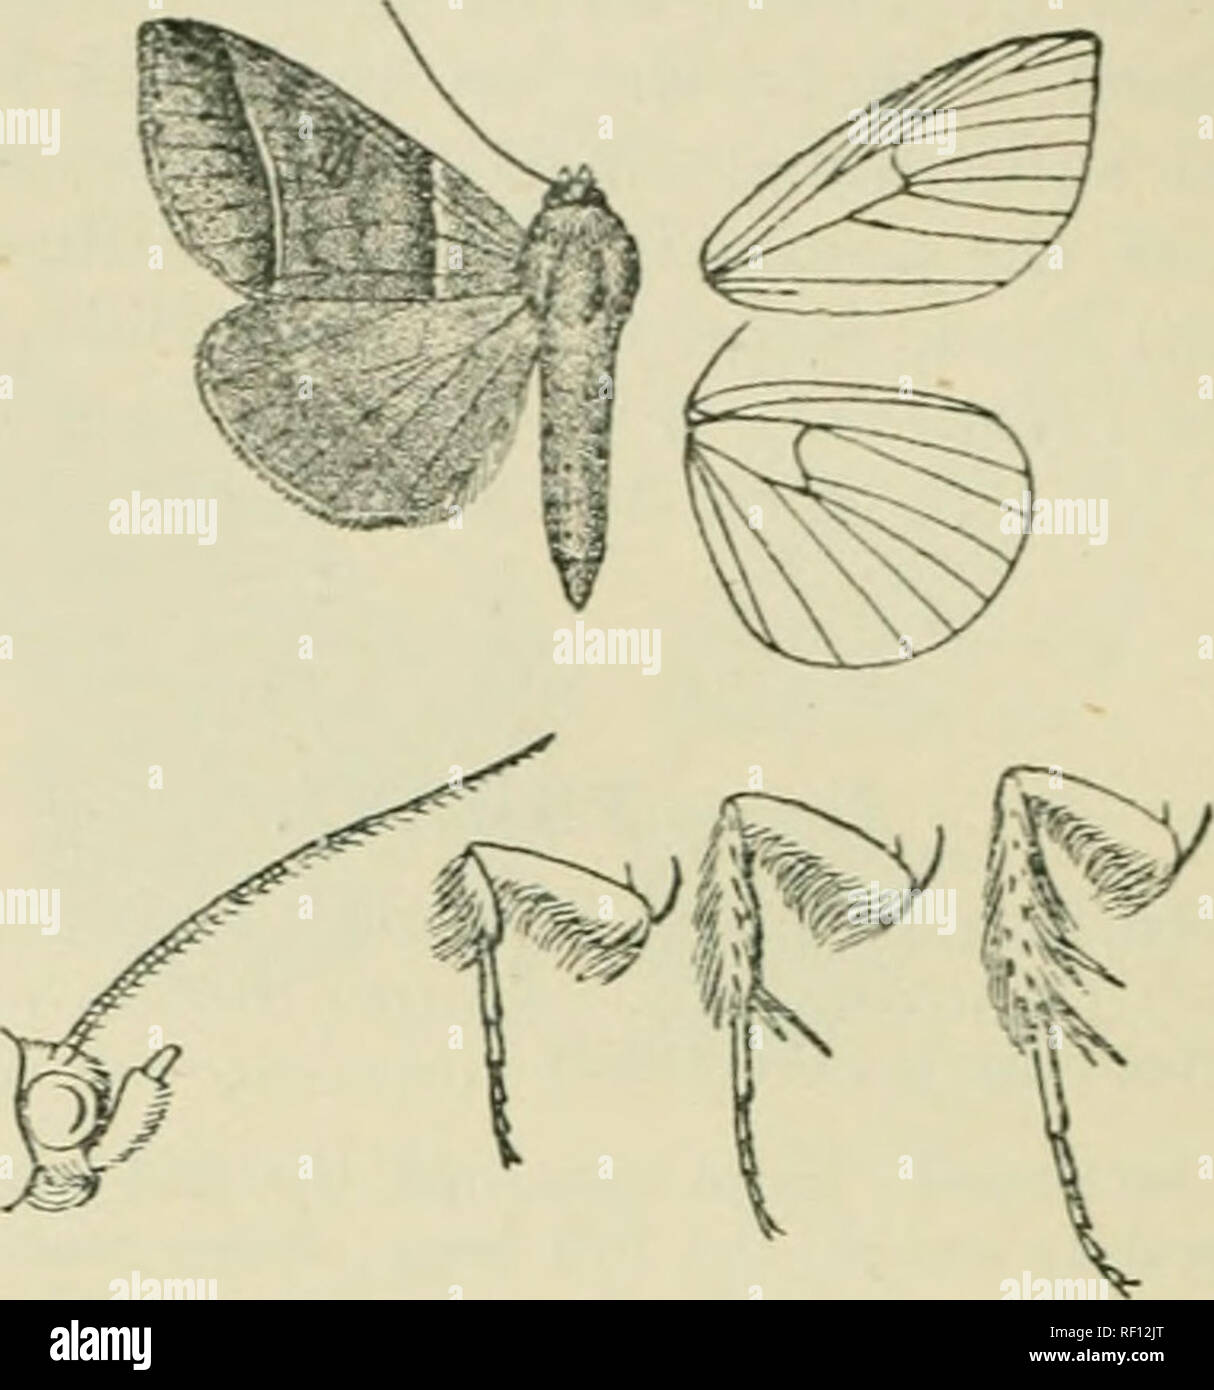 . Catalogue of Lepidoptera Phalaenae in the British Museum. Moths. 103 ^â 0CTlâ¢rDJ:. inner inari,'in ; cilia brownLsh grey; the undorsiJu ochreous brown, the apical area browner.. Fig. 2d.Phii)ys vinculum, S â¢ r- TIab. U.S,A., Southern States, Florida (Doiihlecloij), 2 6 , Miami (Schrnis), 1 c?, N. Smyrna, 1 d, Tampa. 1 6 ; Bahamas, Nassiiu (Sir G. Carter, Boiiliofe), 3 d&quot;, 1 $ . Krj). 36-40 millim. 7877. Phurys immunis. (Plate CCXXIV. fig. 1.) Thiu-ys hnmunu, Guen. Noct. iii. p. 305 (1852); Druce, Biol. Cent.-Am., Het. i. p. 385. S â¢ Head and thorax ochreous tinged with red-l)r()wn ; Stock Photo